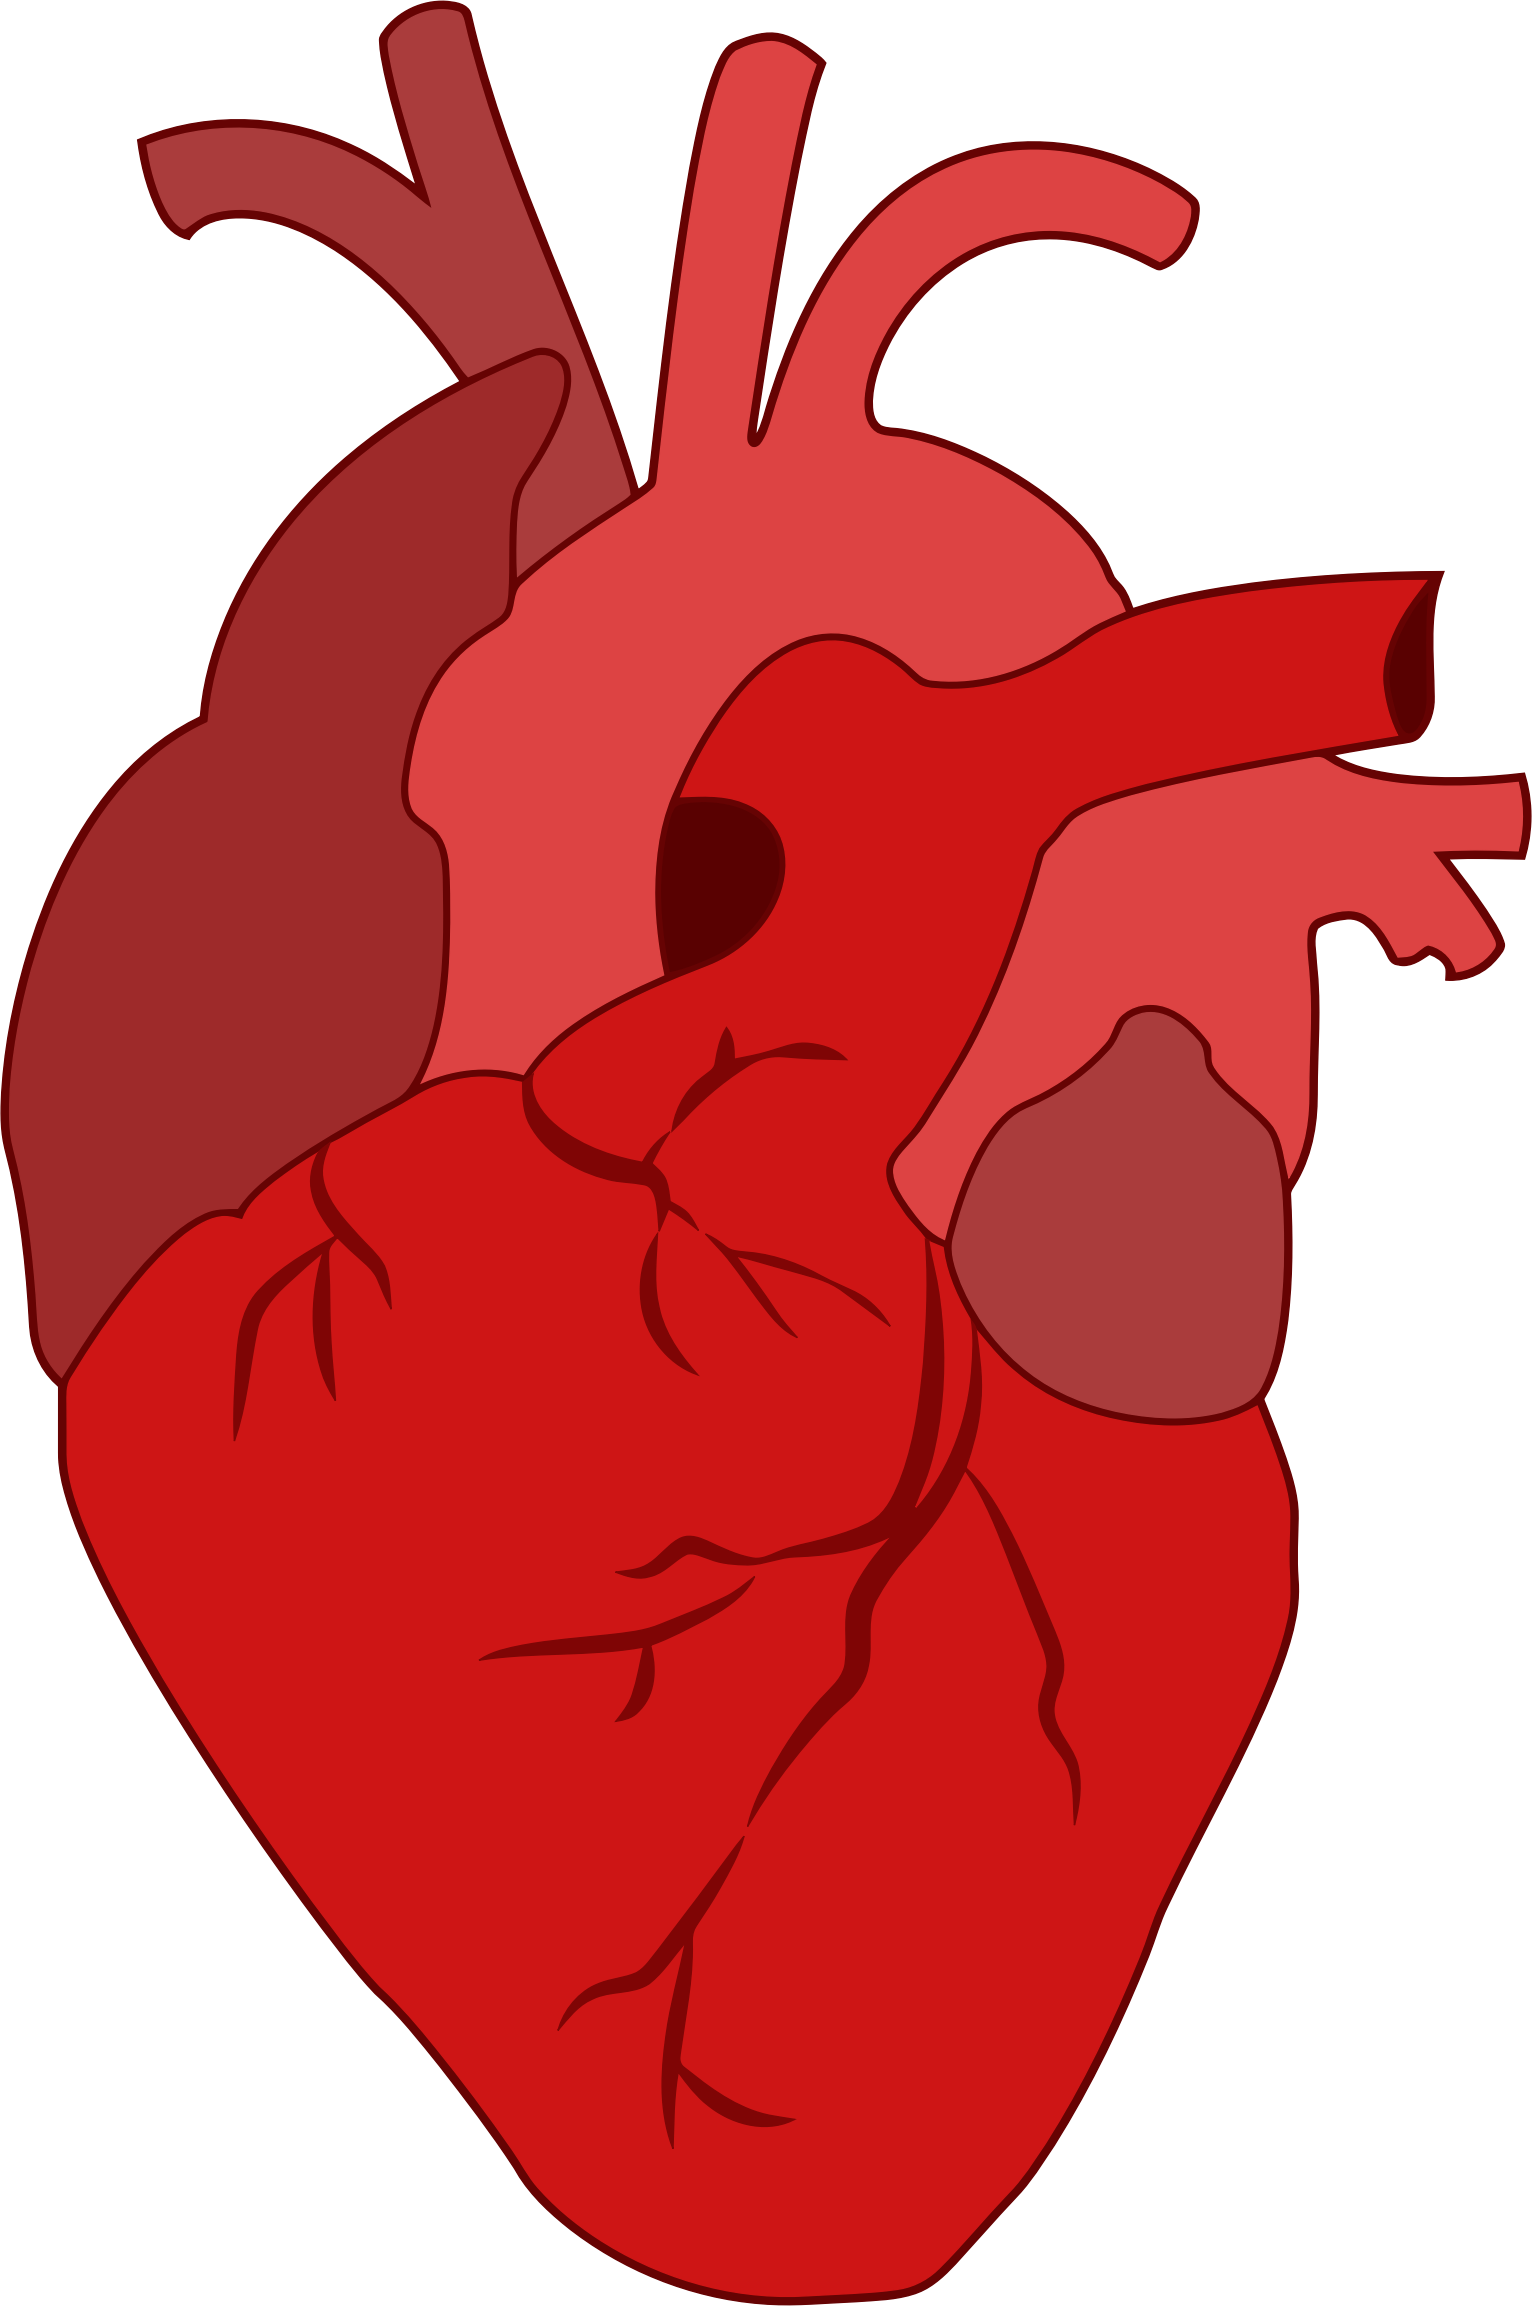 Heart Drawing Ideas | Free download on ClipArtMag